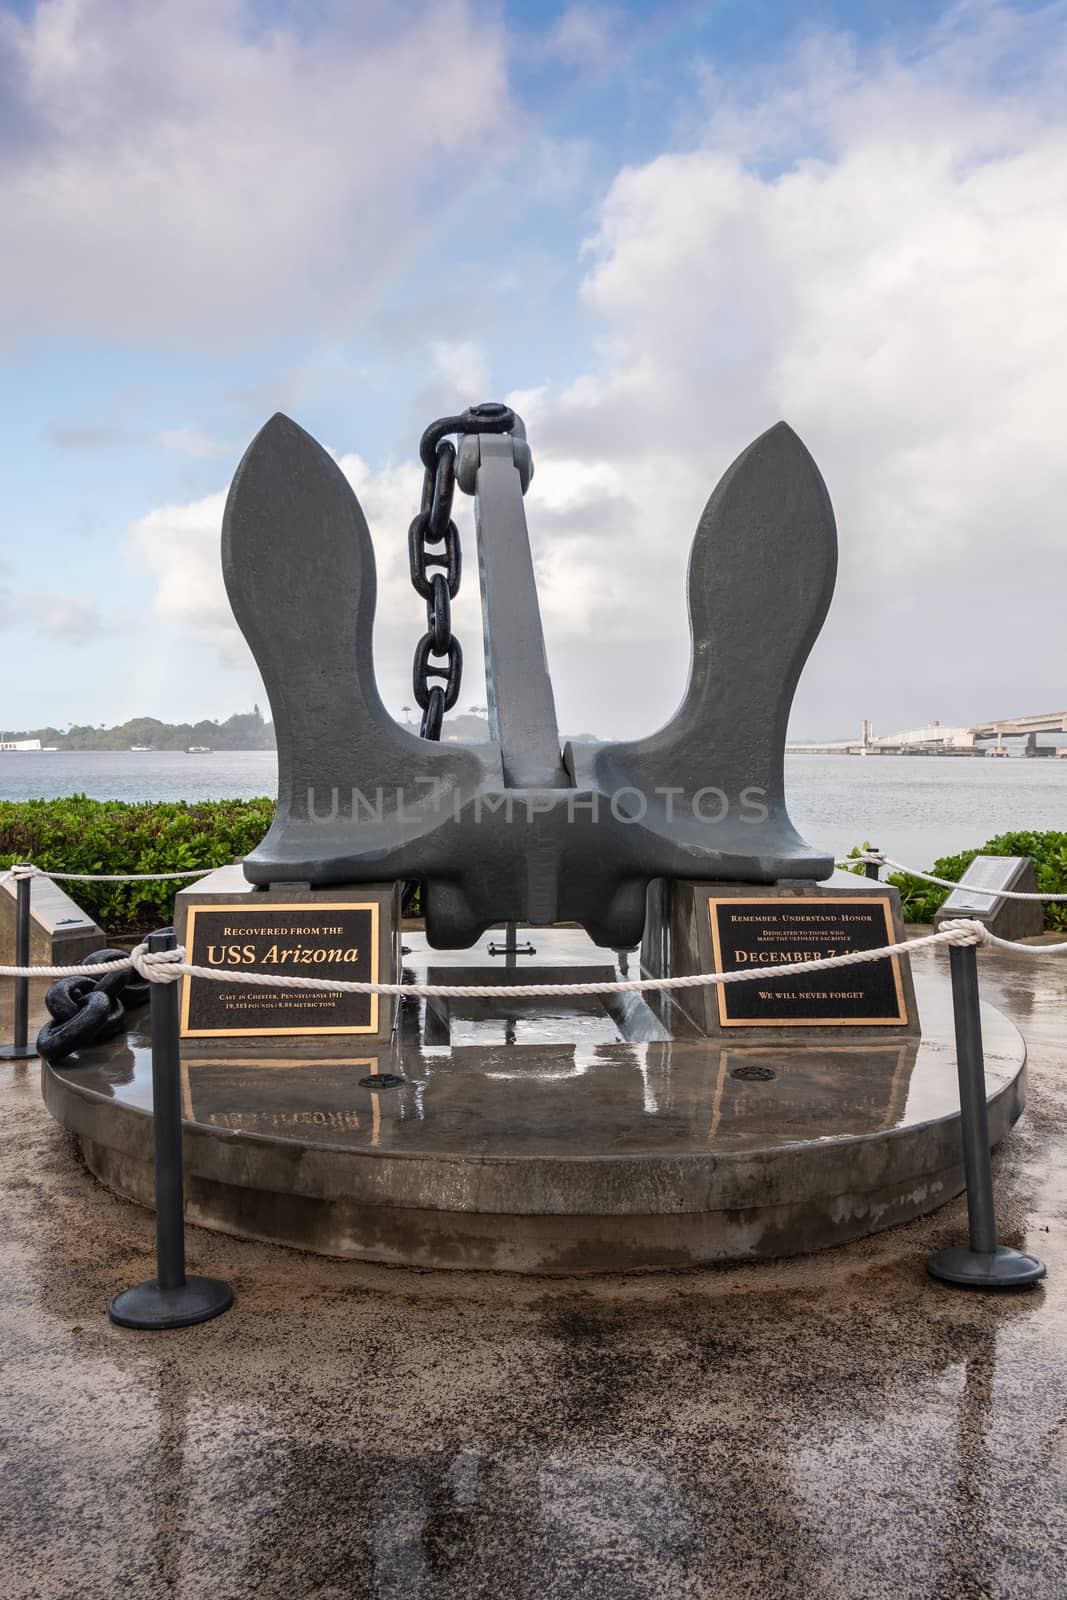 Oahu, Hawaii, USA. - January 10, 2020: Pearl Harbor. USS Arizona anchor on display as statue under blue cloudscape. Wet surface.